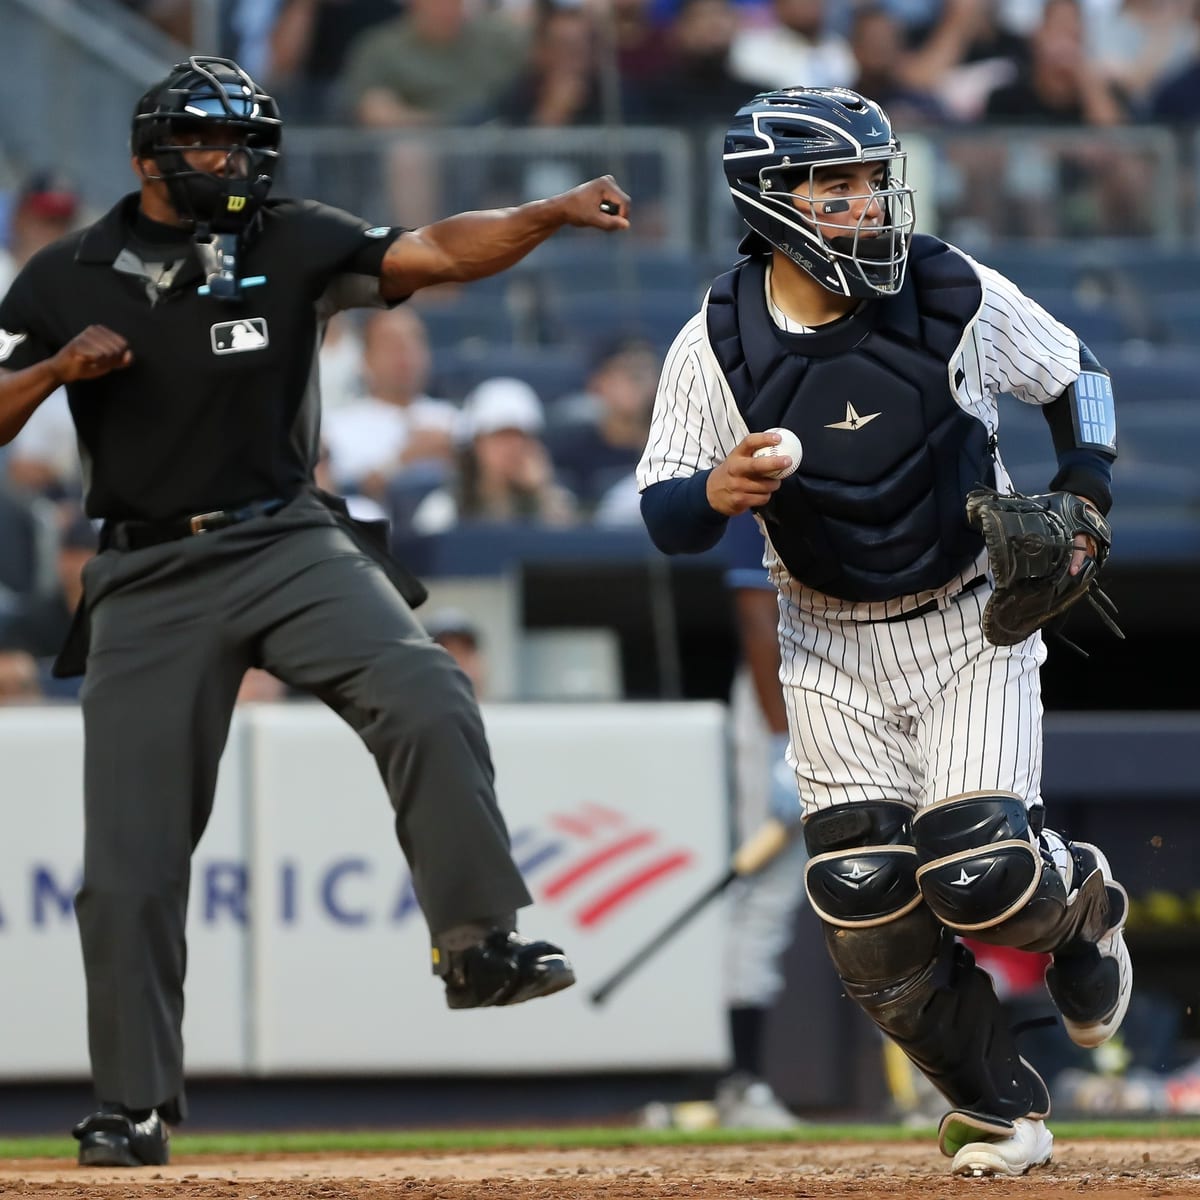 The Yankees need Jose Trevino to start throughout the stretch run